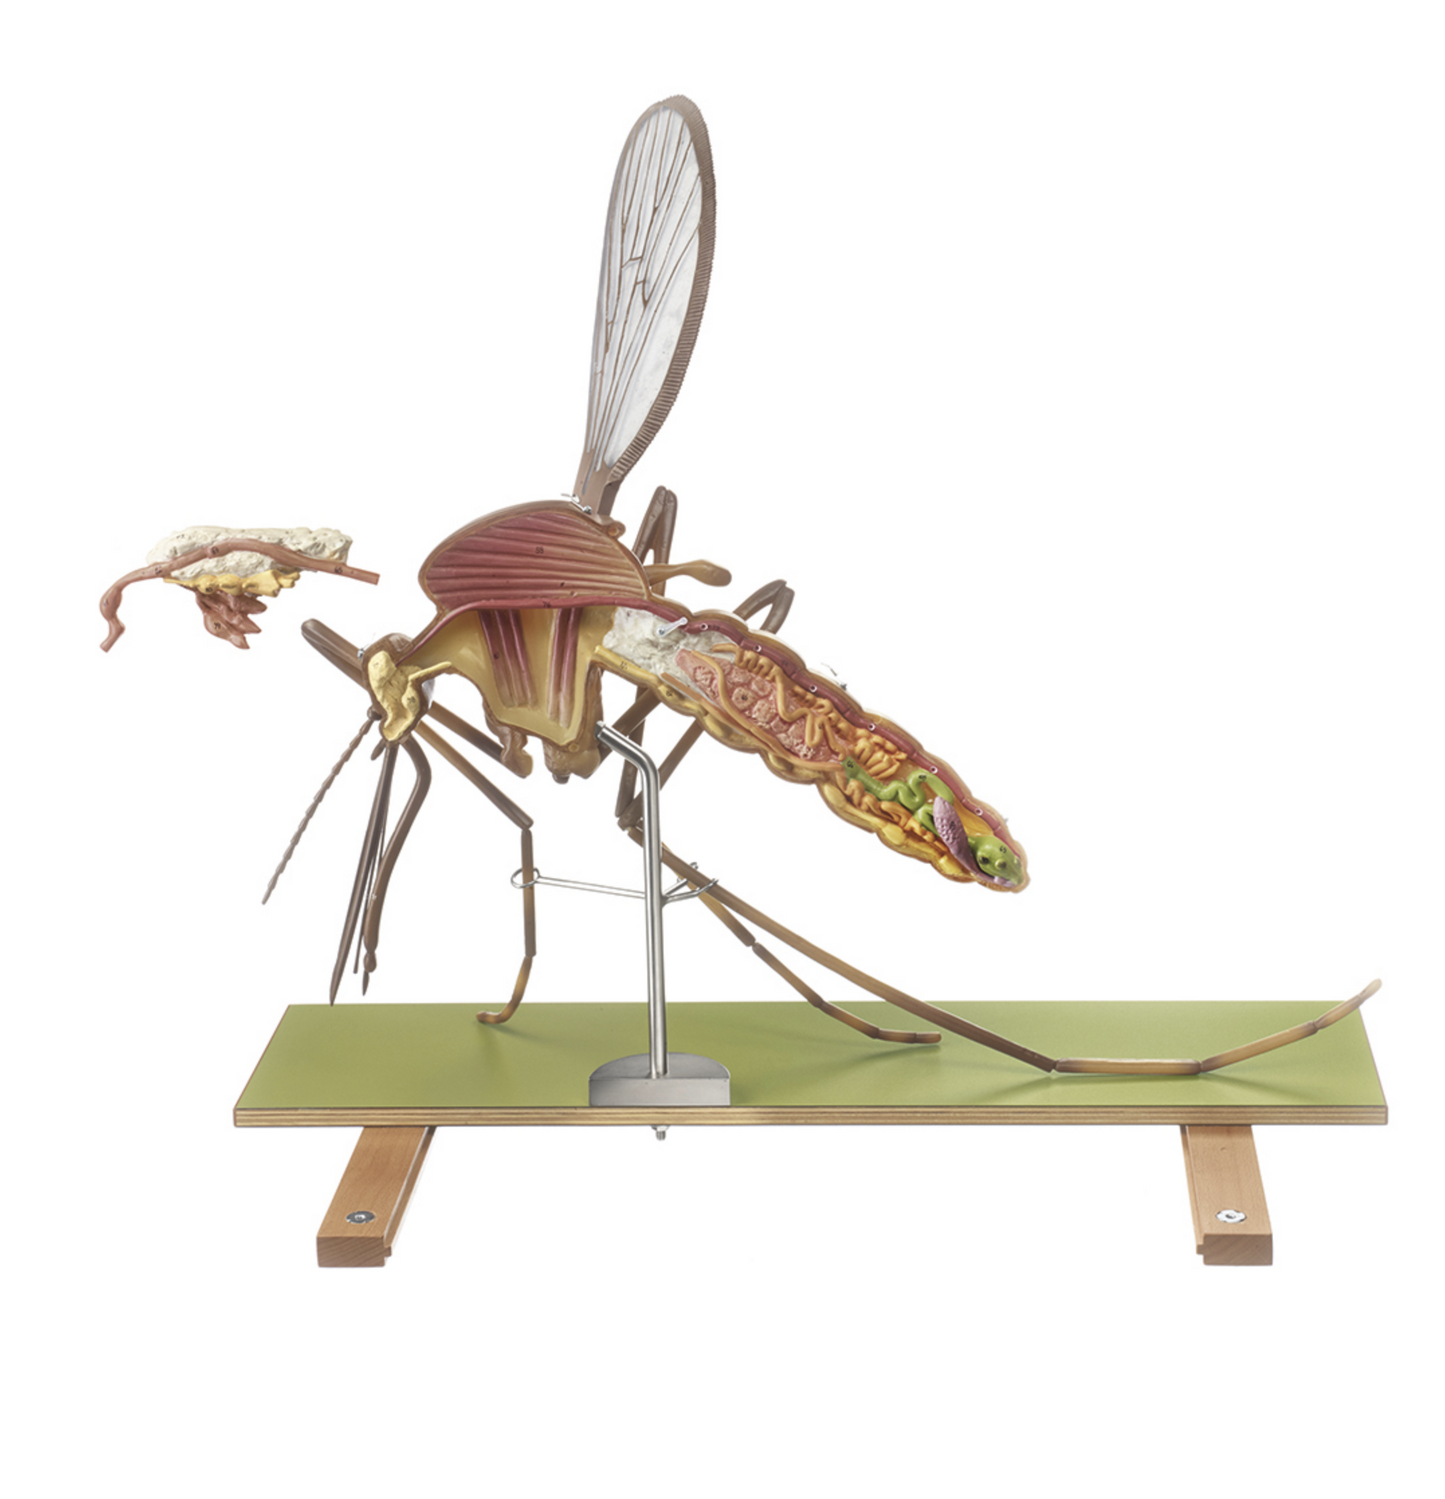 Model of a mosquito (Culex pipiens) in the highest quality and greatly enlarged. Can be separated into 7 parts